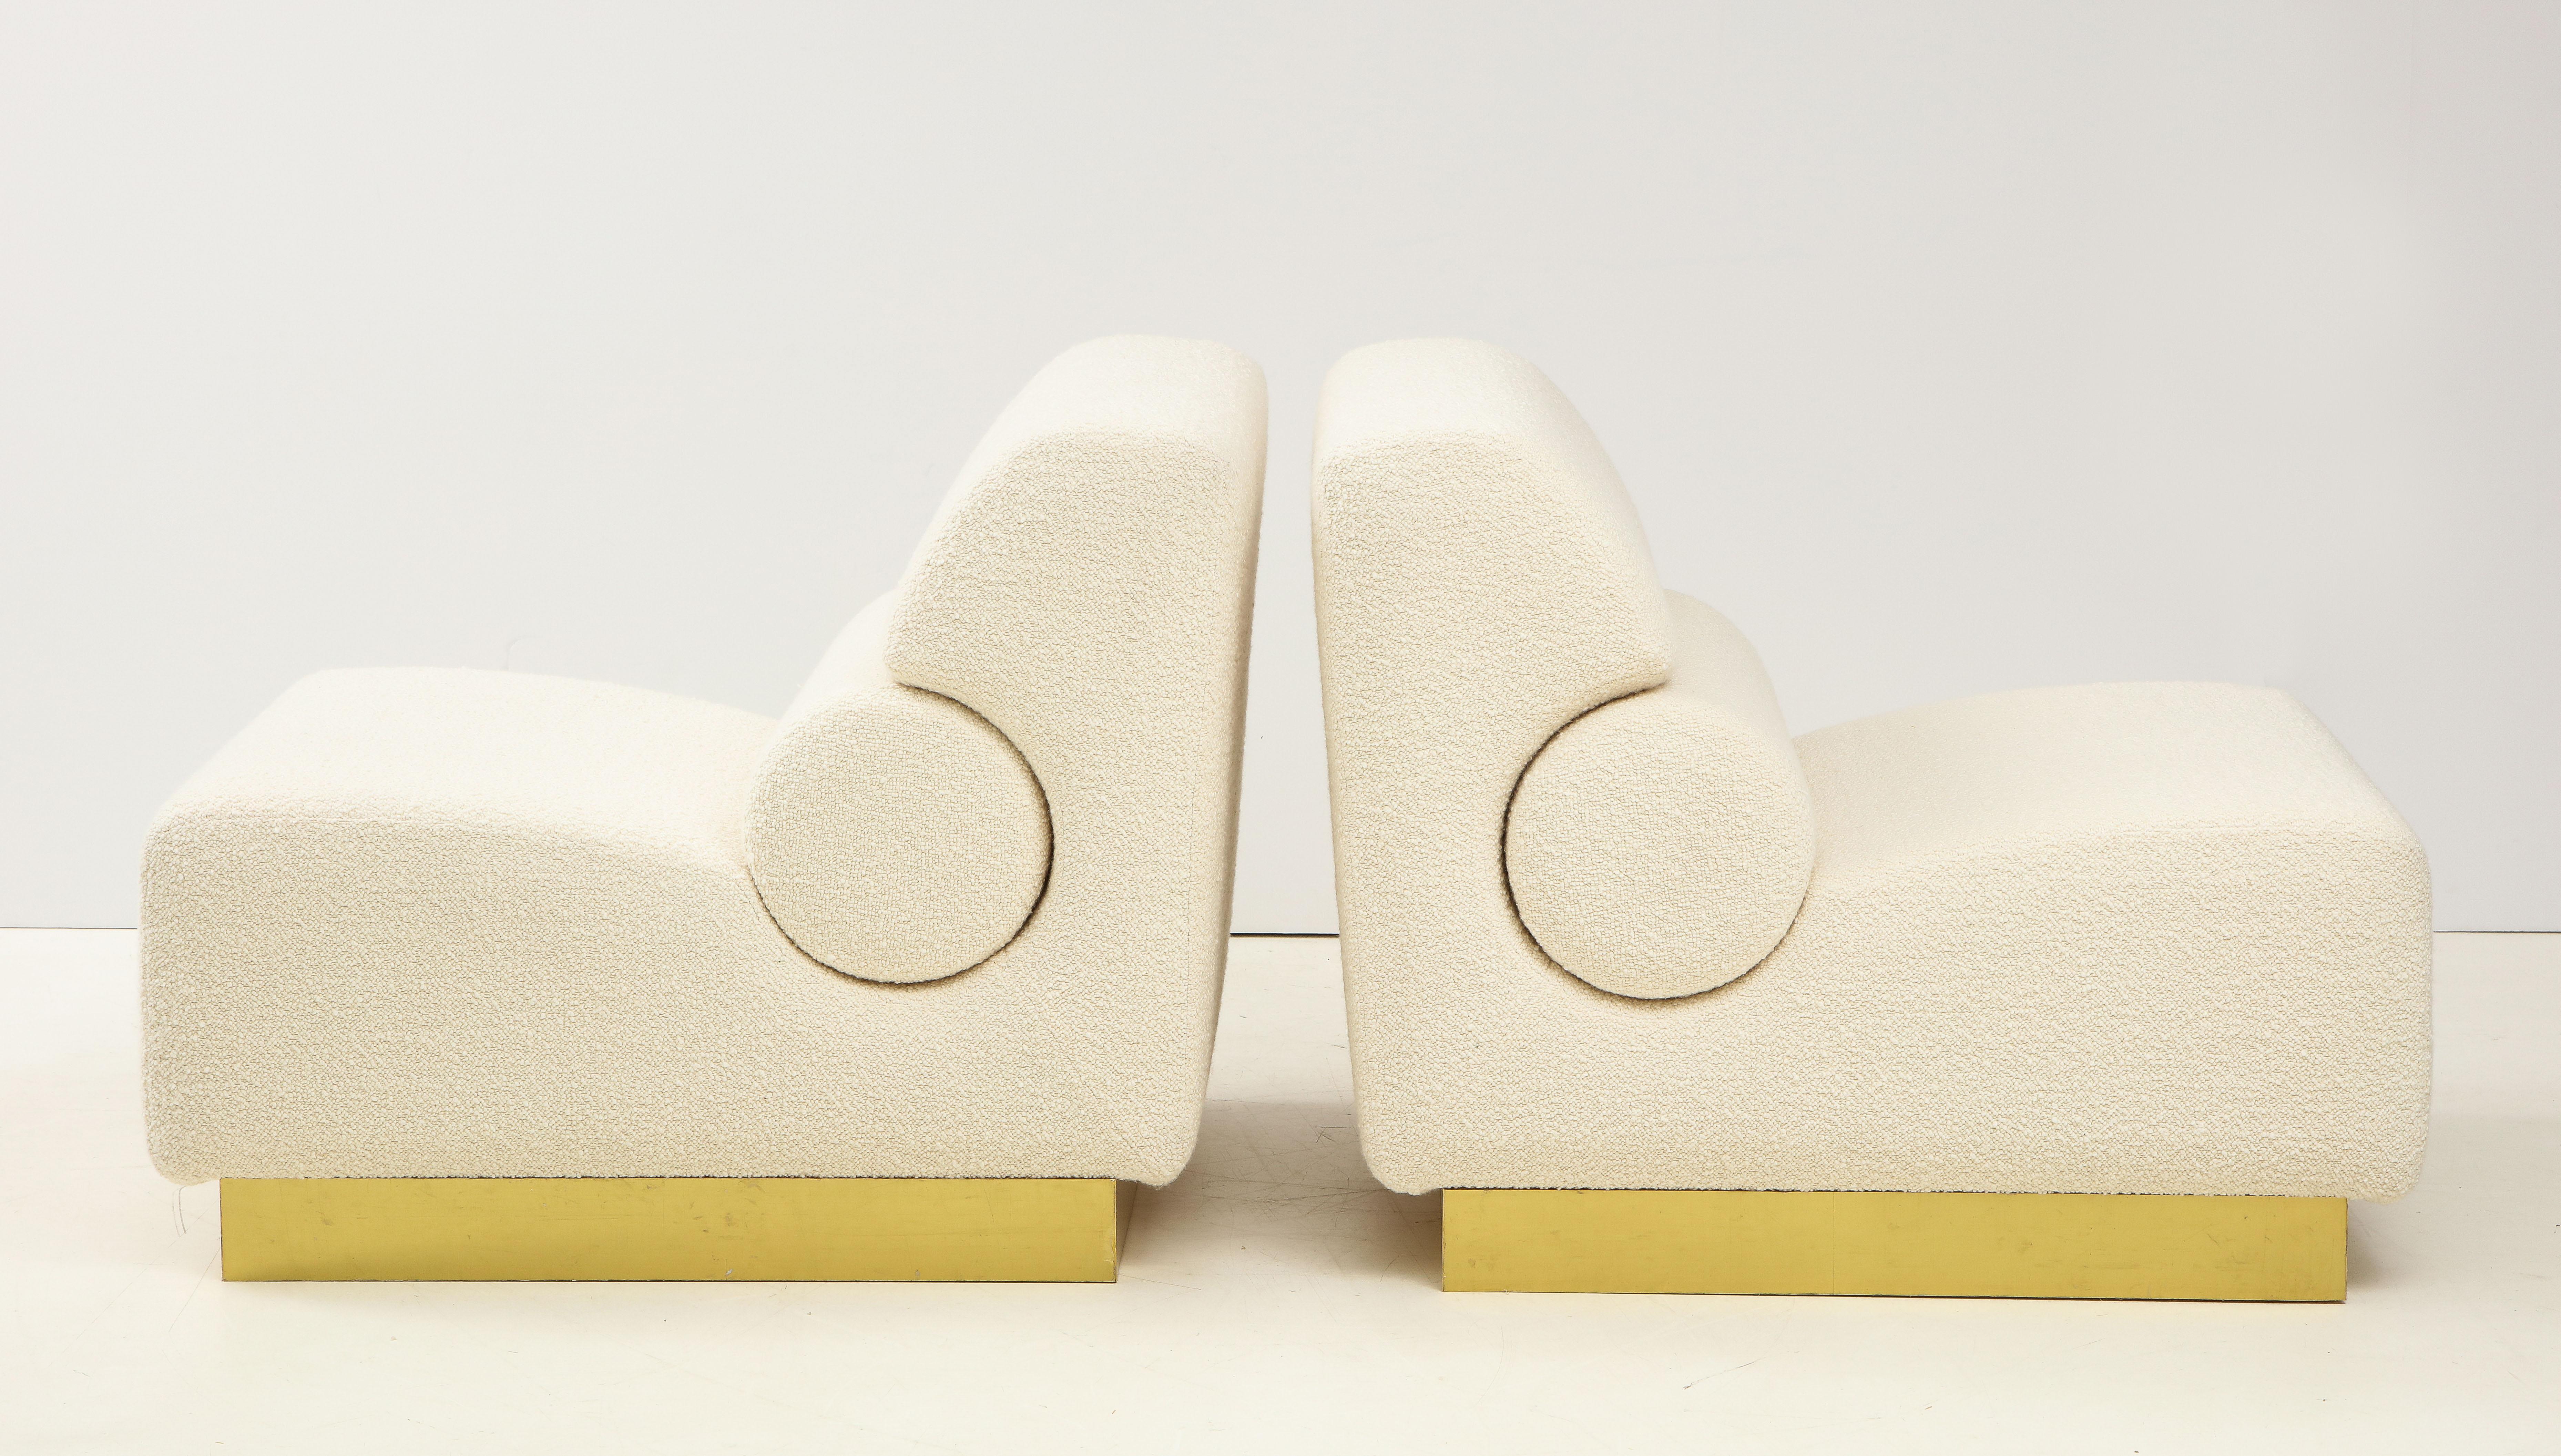 Impressive pair of ivory bouclé sculptural lounge chairs or slipper chairs custom made in Florence, Italy. Superb craftsmanship and design lines. These large and roomy lounge chairs are extremely comfortable and sit atop a square brass plinth